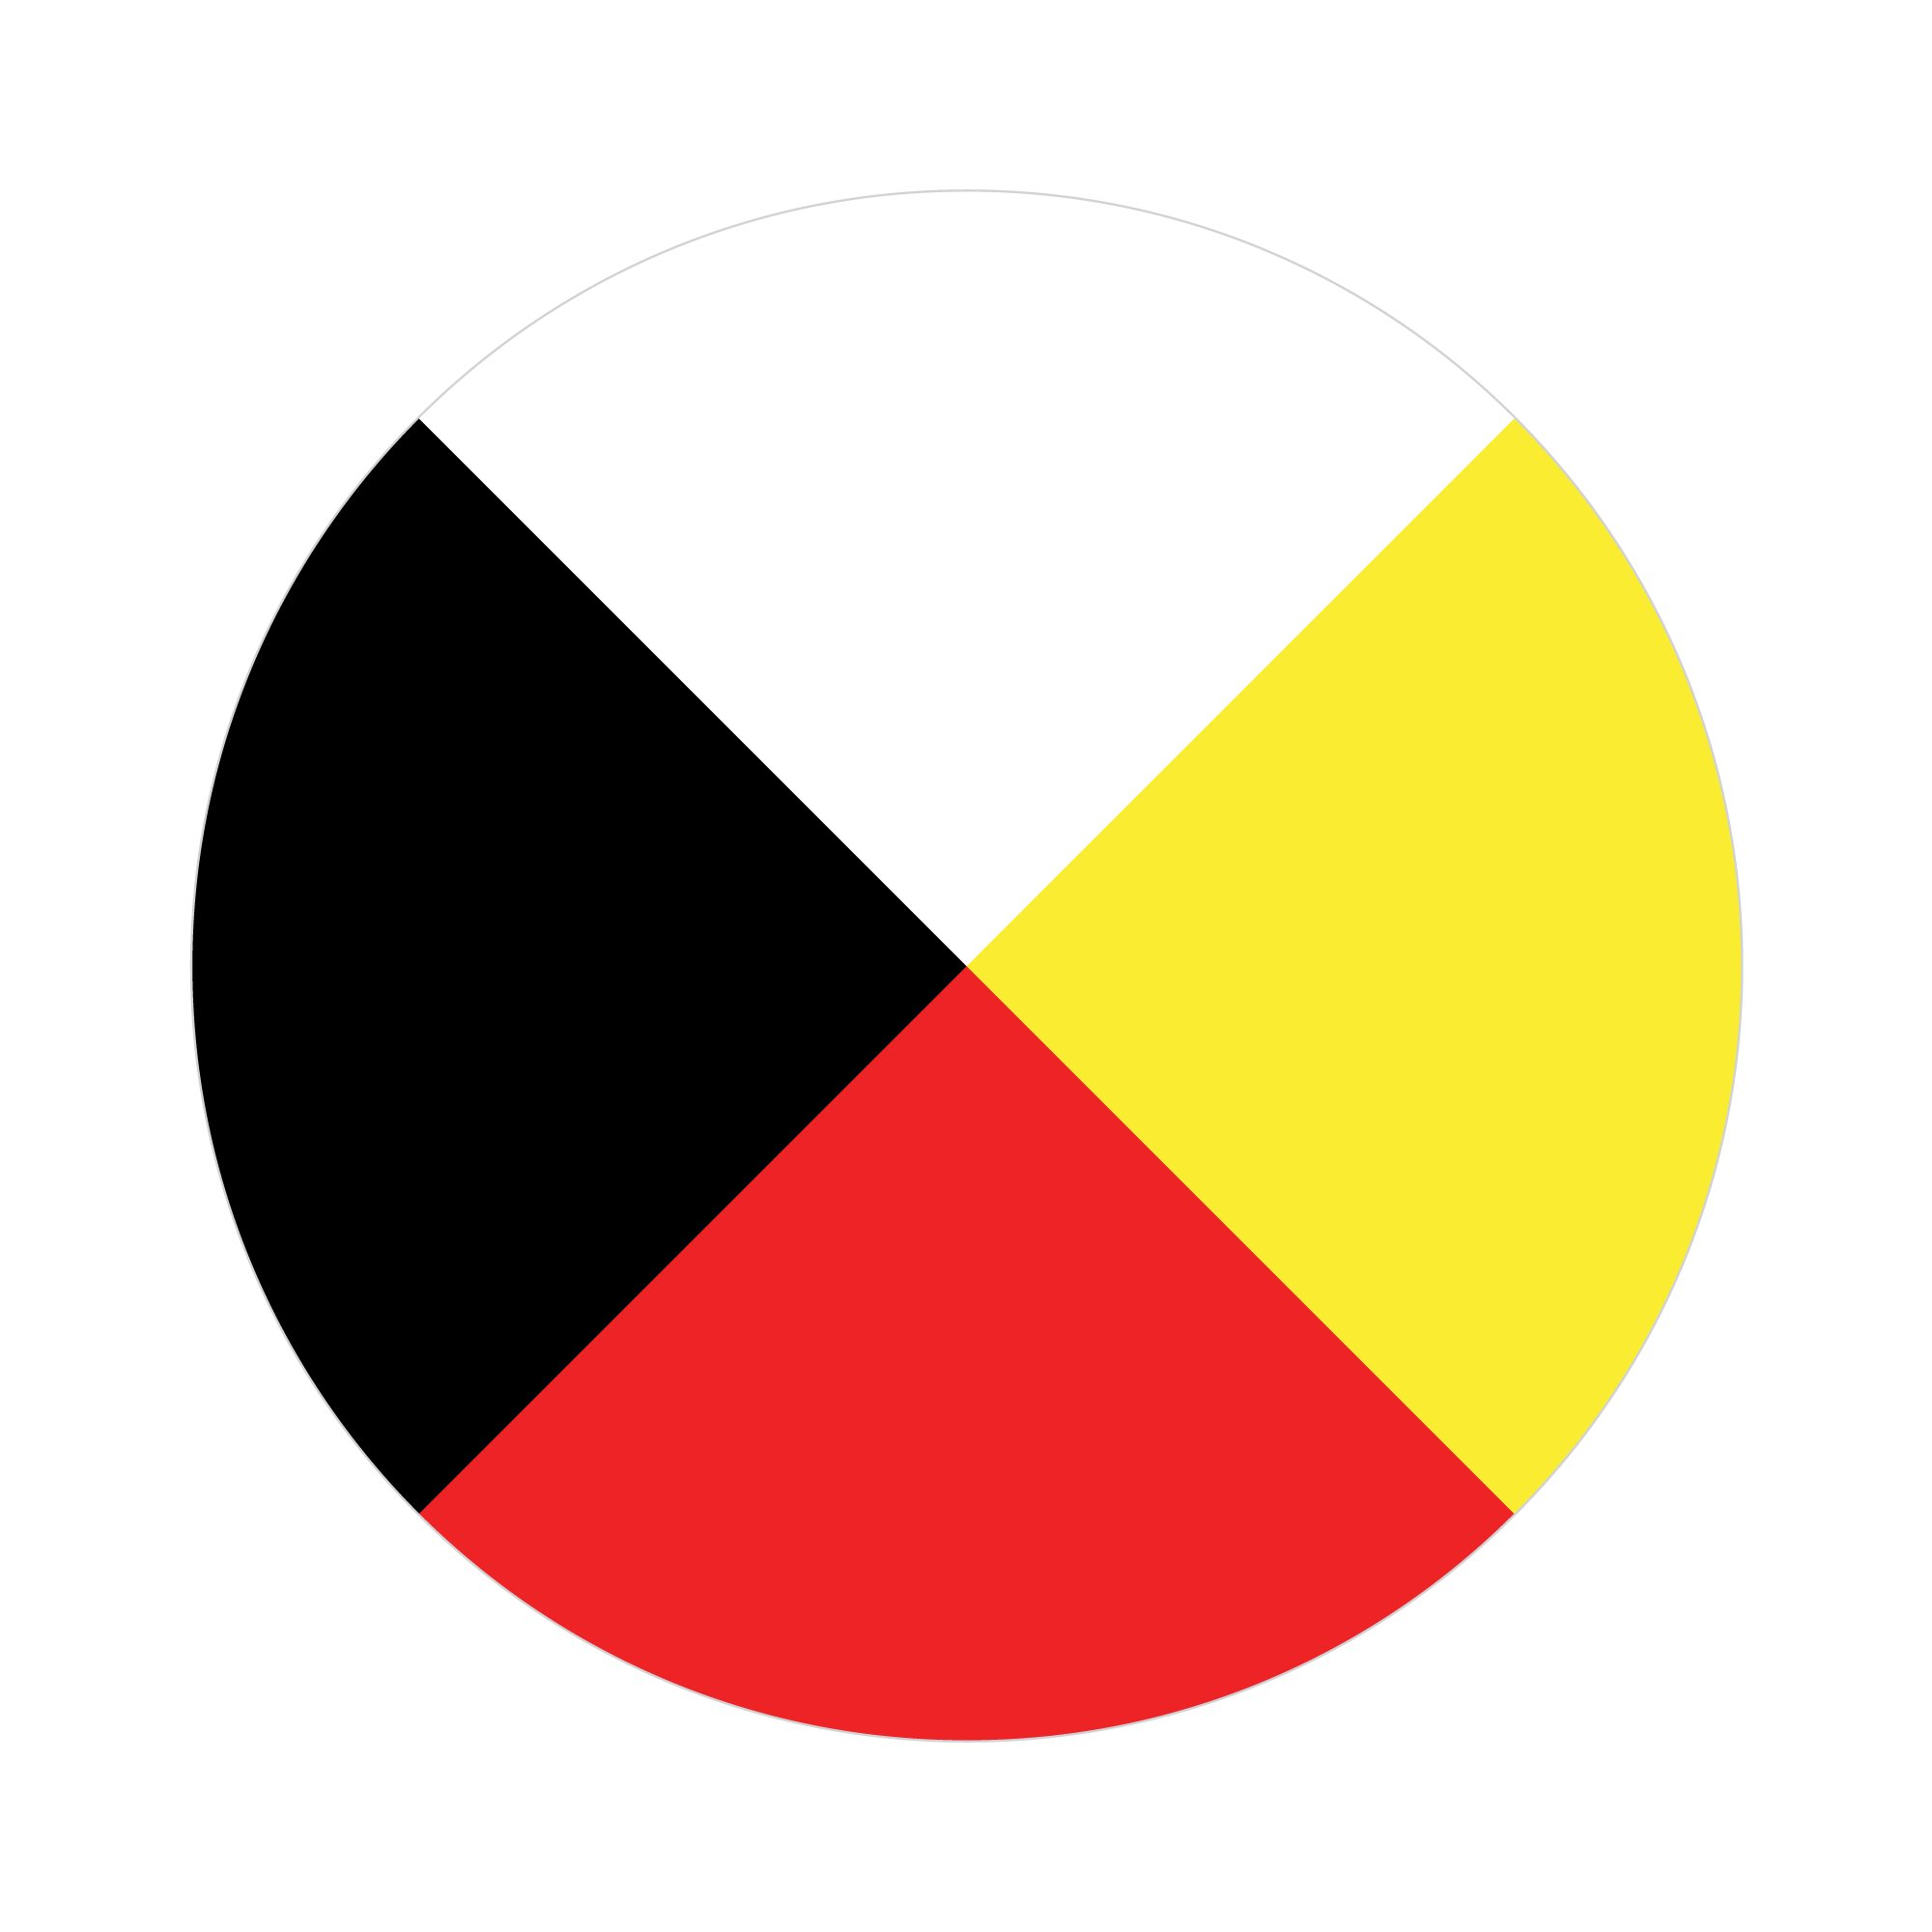 the medicine wheel symbol, a circle made up with quarters of white, black, red and yellow colour